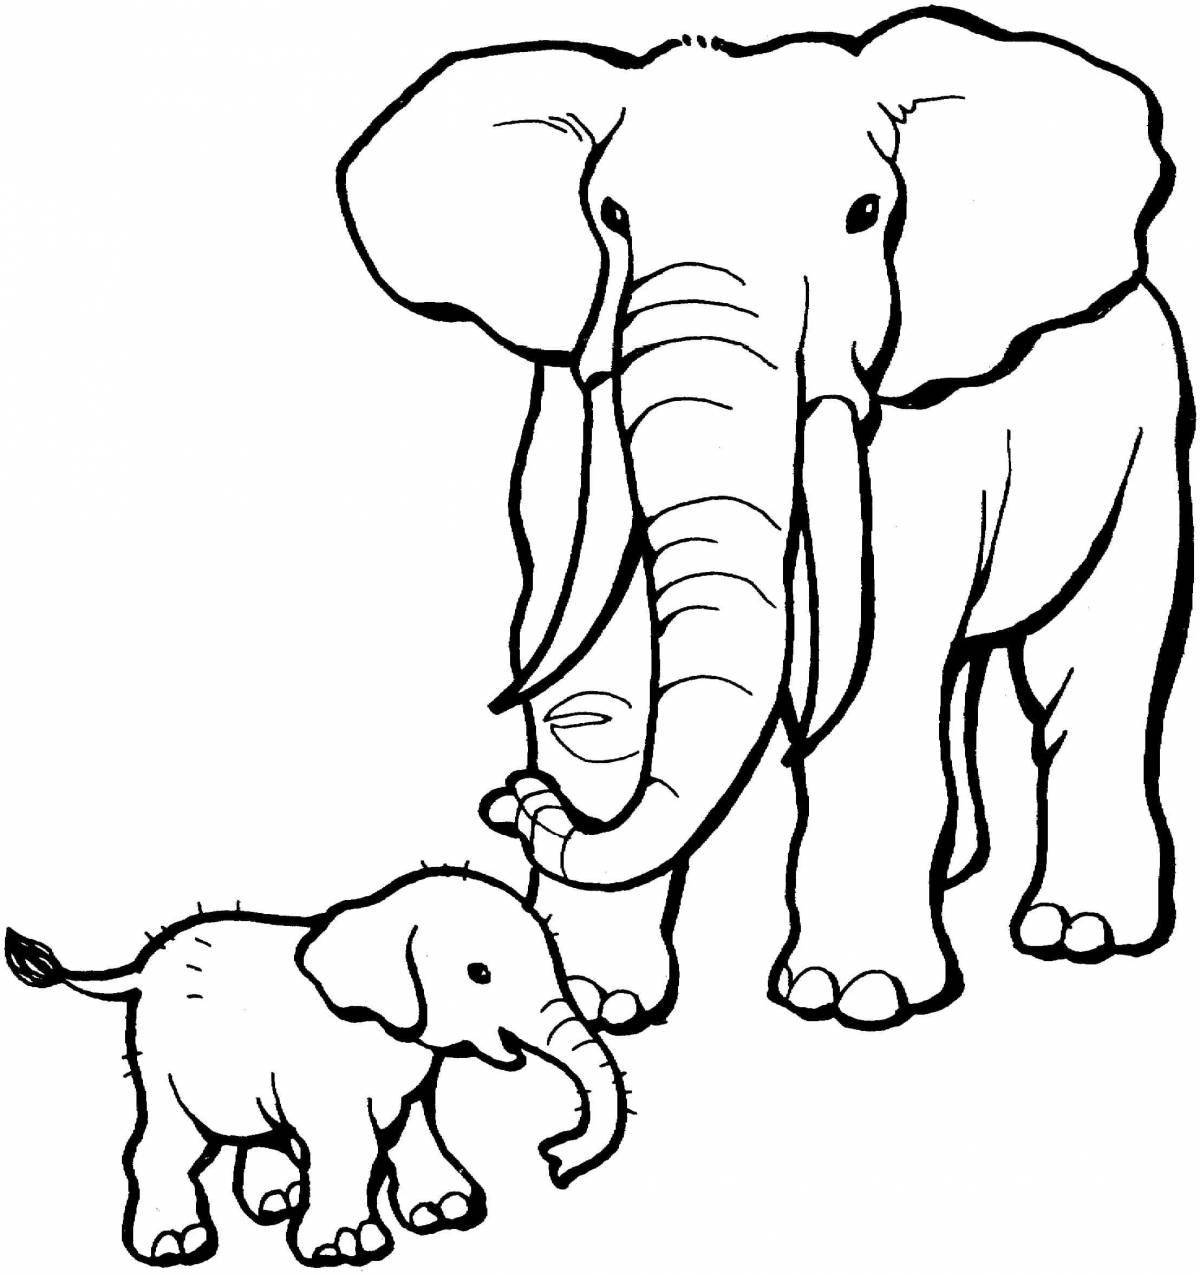 Amazing elephant coloring page for kids